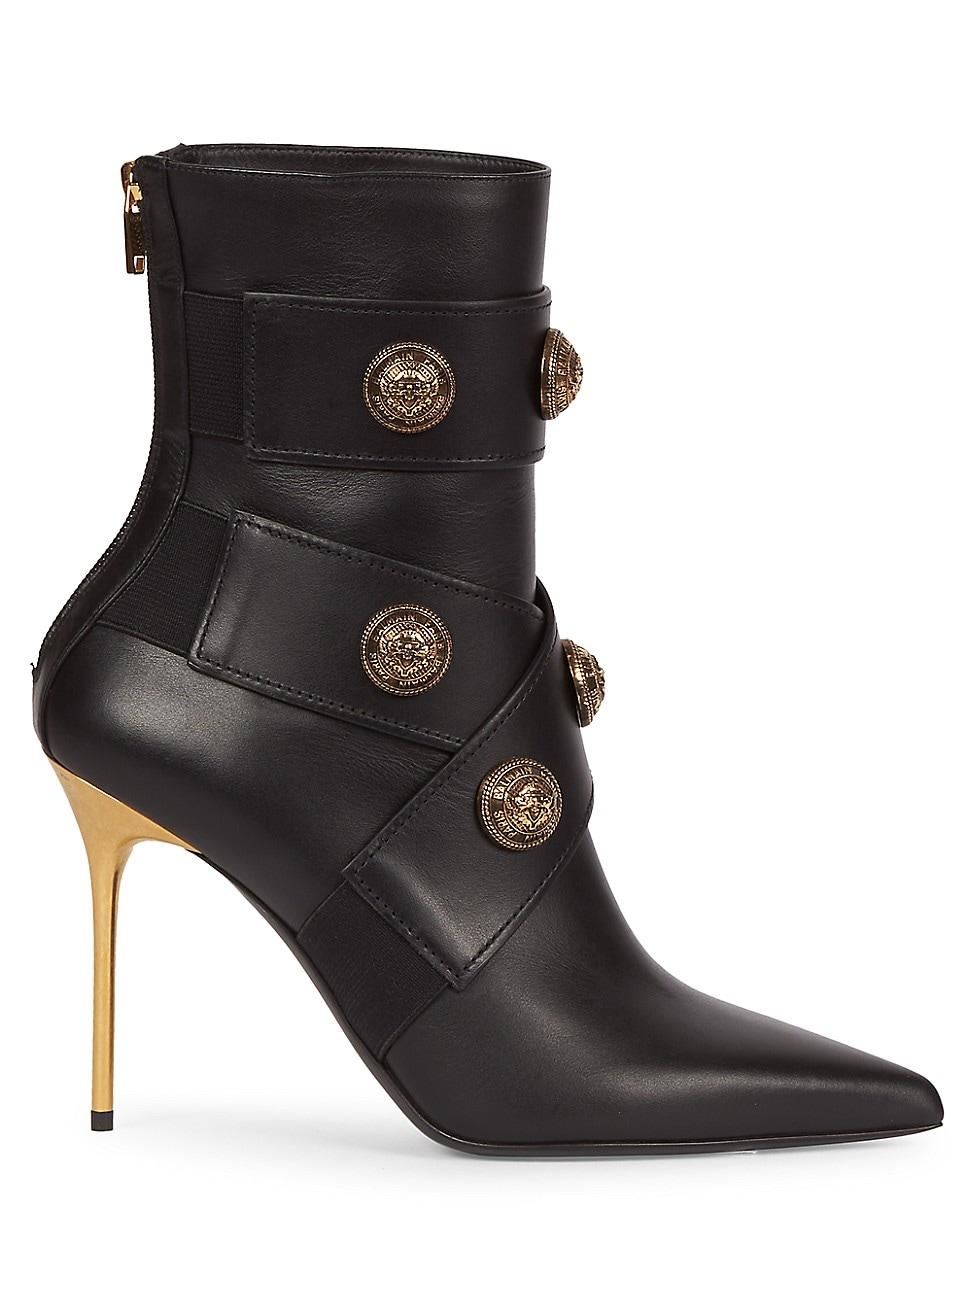 Balmain Alma Leather Ankle Boots in Black | Lyst